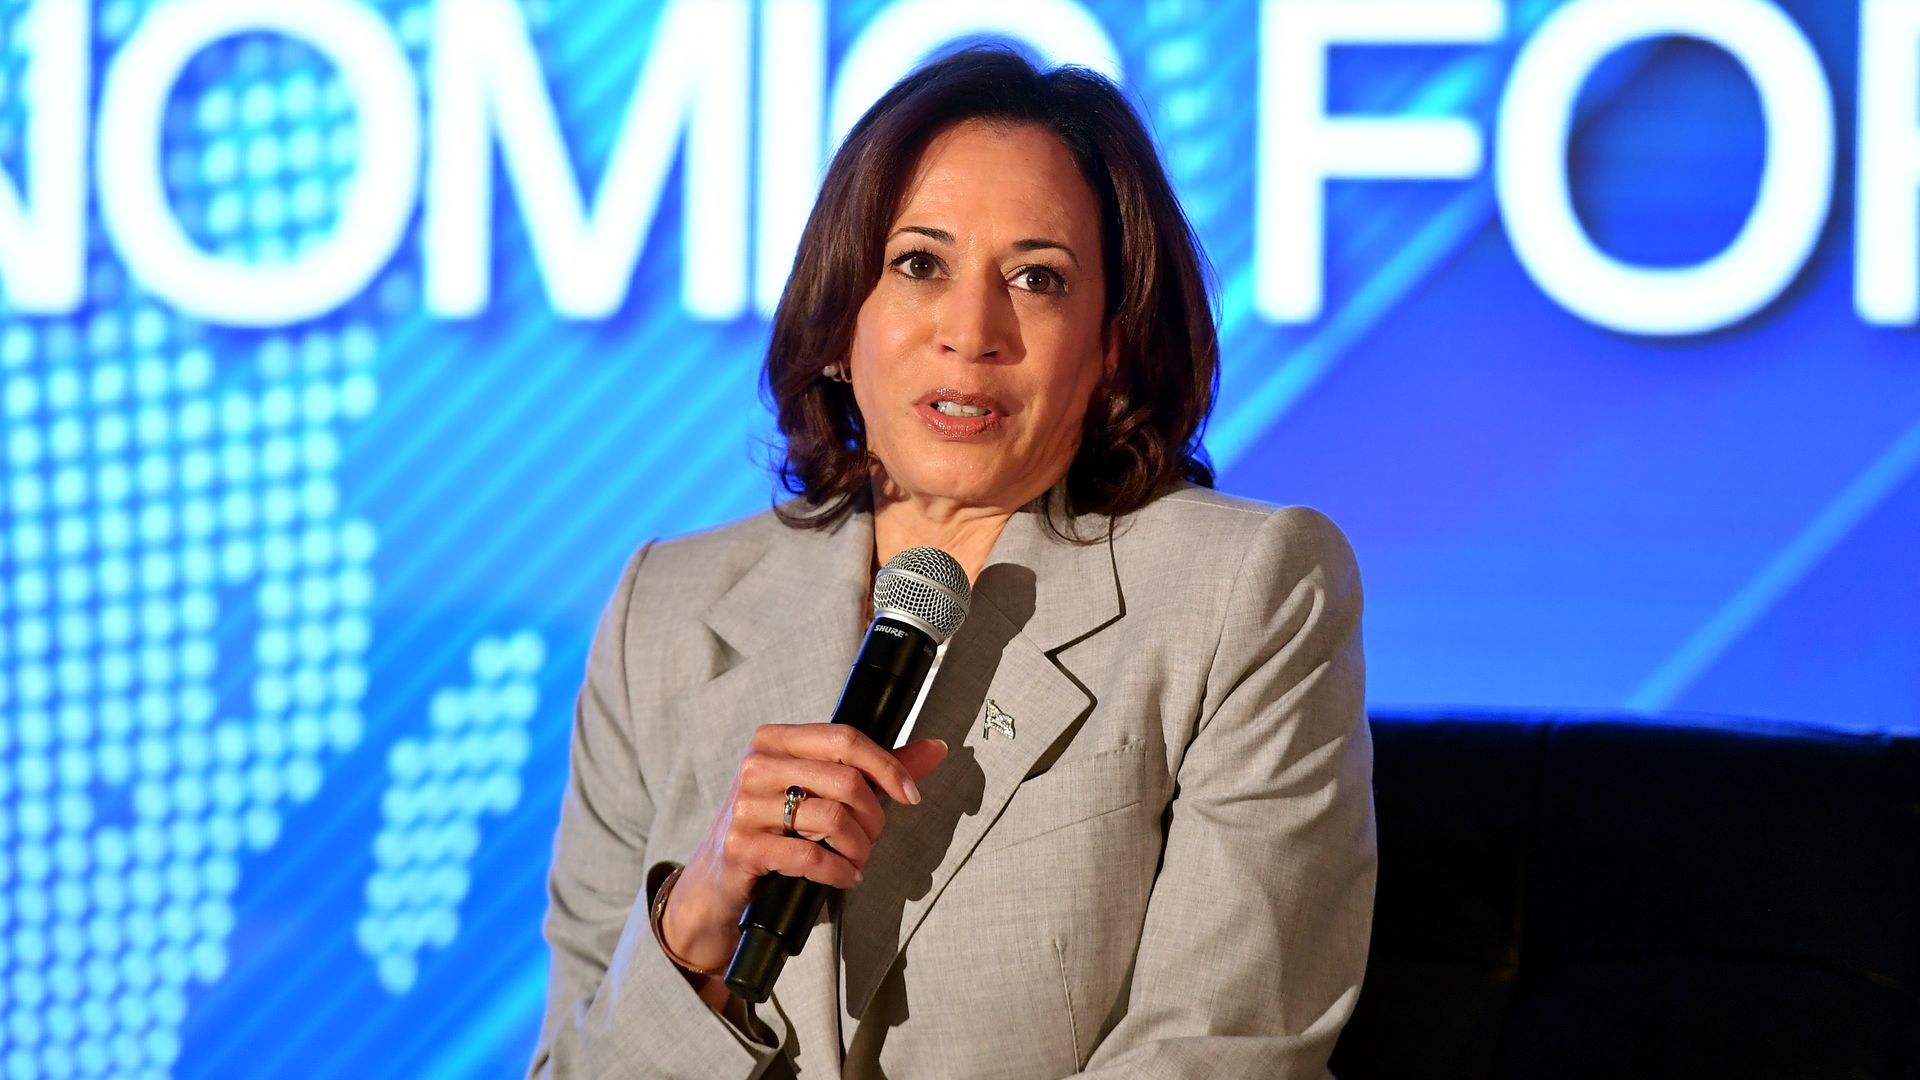 Photo shows VP Kamala Harris, wearing a suit and holding a microphone, on stage at the Global Black Economic Forum.